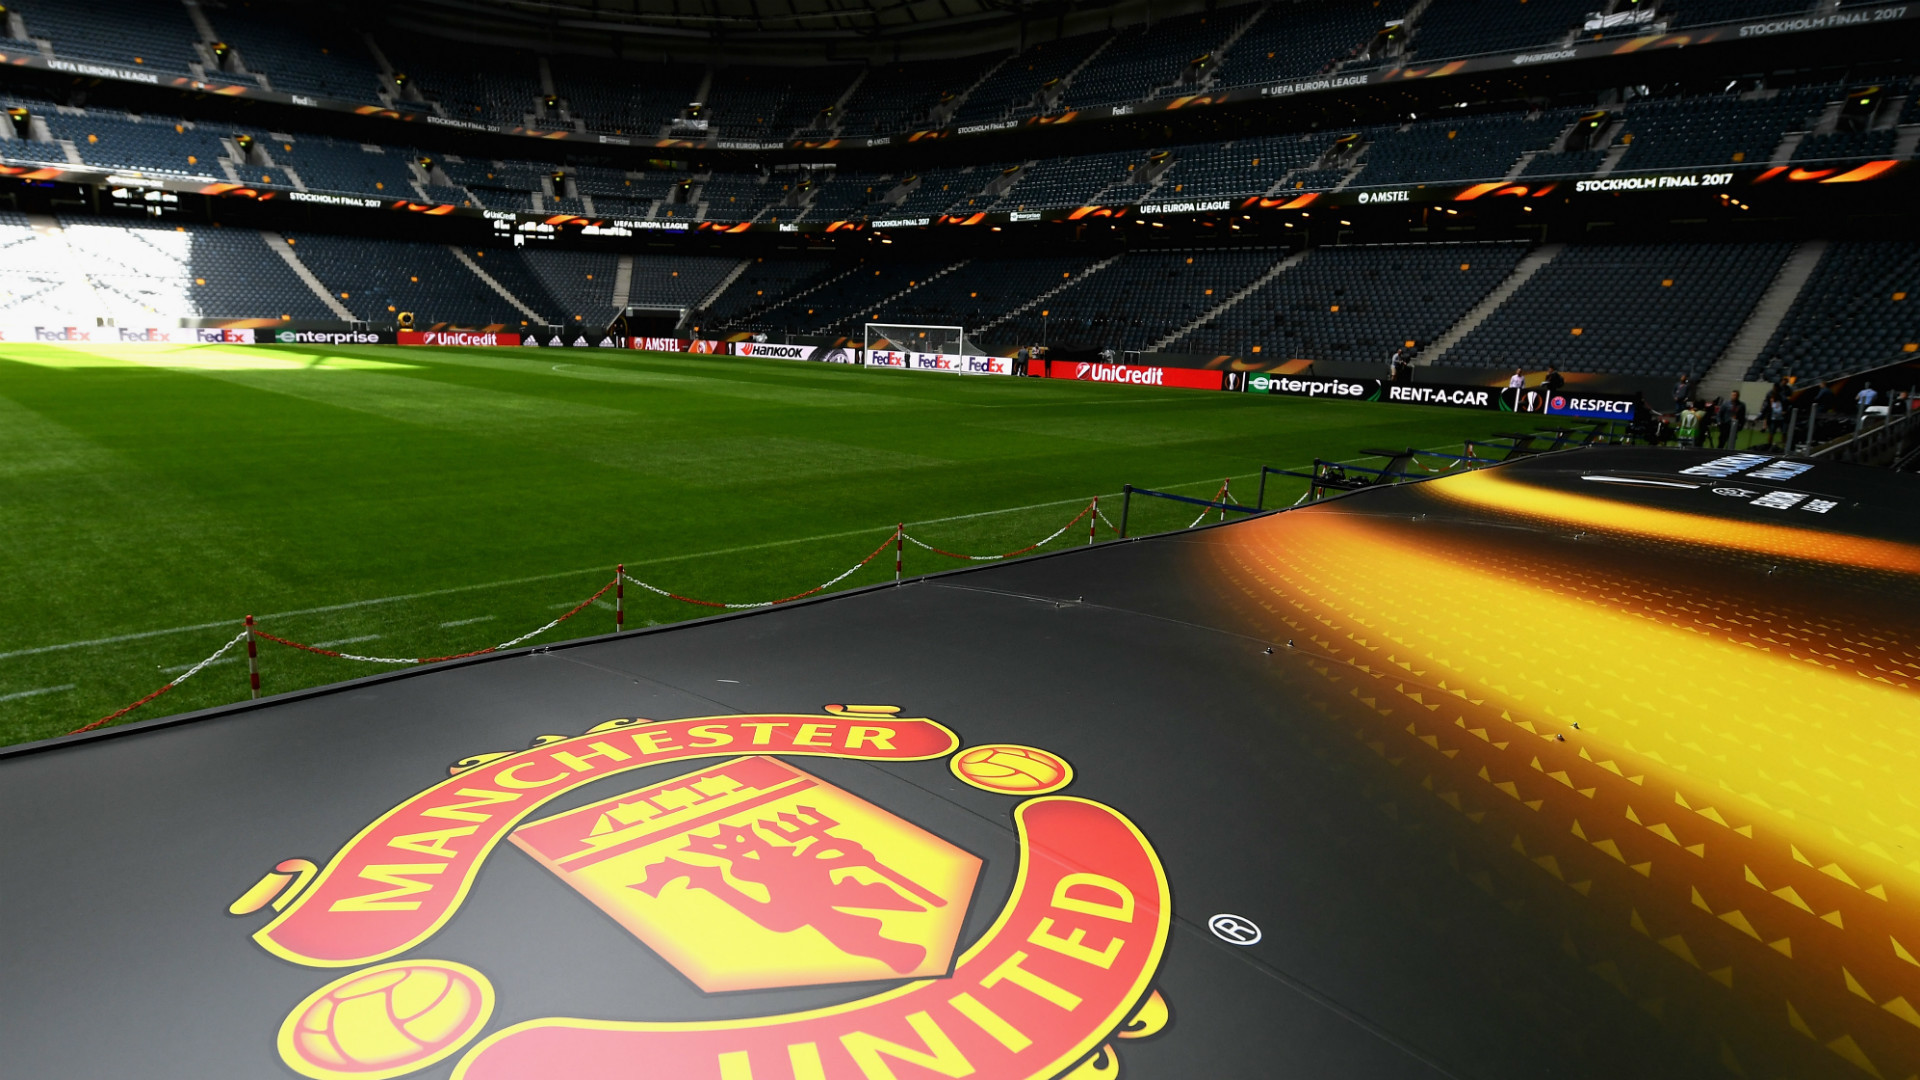 hinh nen manchester united 30 - wallpaper free download